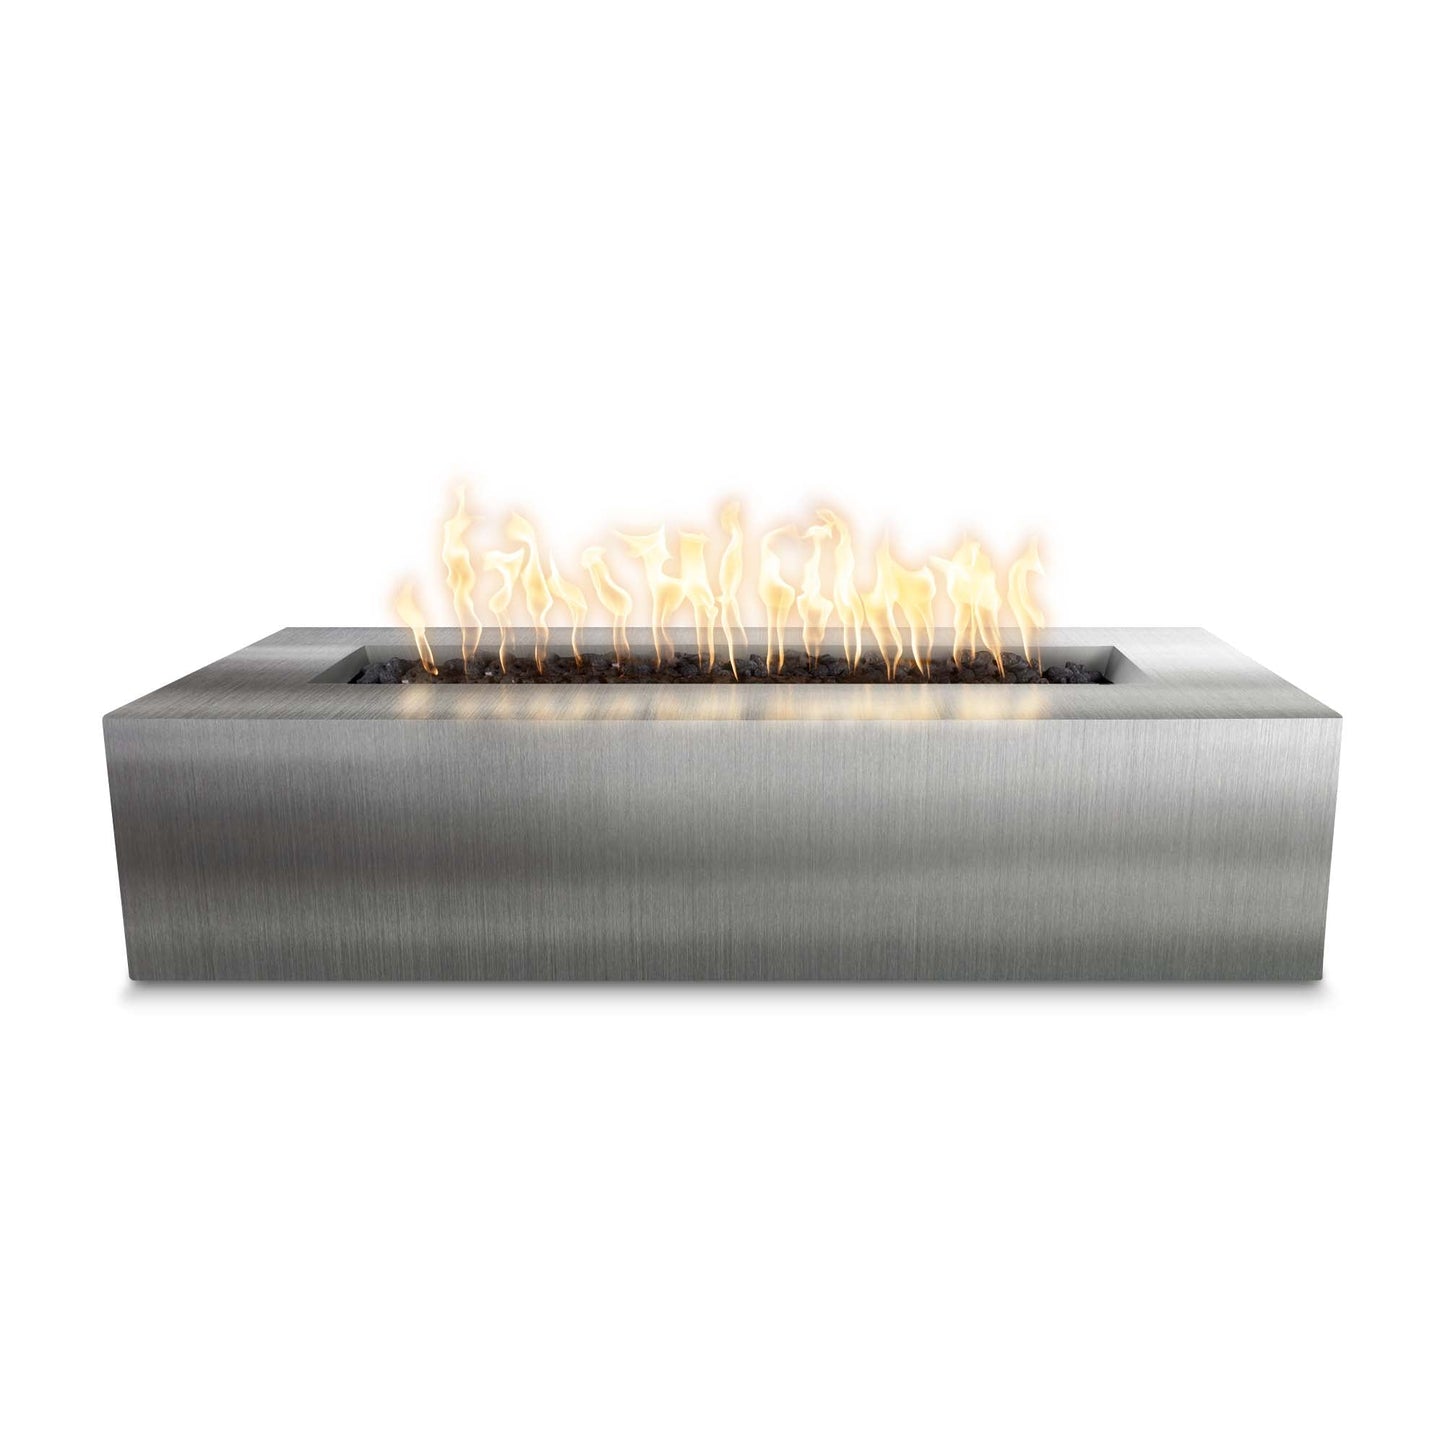 The Outdoor Plus Rectangular Regal 48" Corten Steel Natural Gas Fire Pit with Match Lit Ignition